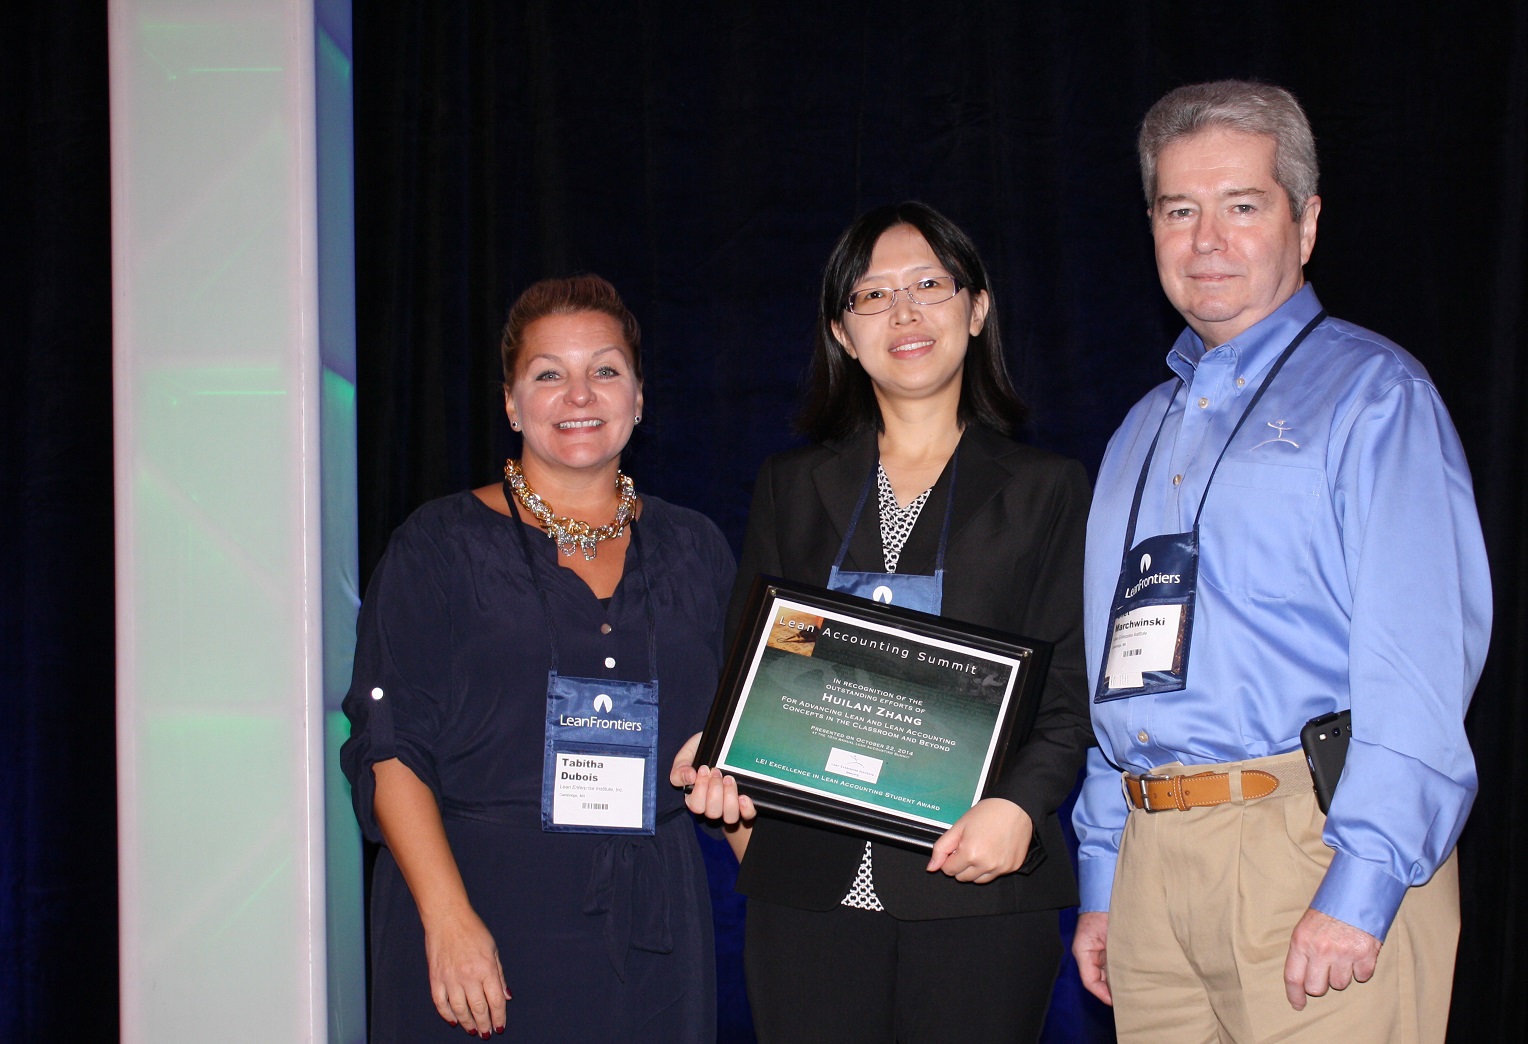 Student Huilan Zhang, center, accepts her 2014 Excellence in Lean Accounting Award from Chet Marchwinski and Tabitha Dubois of the Lean Enterprise Institute